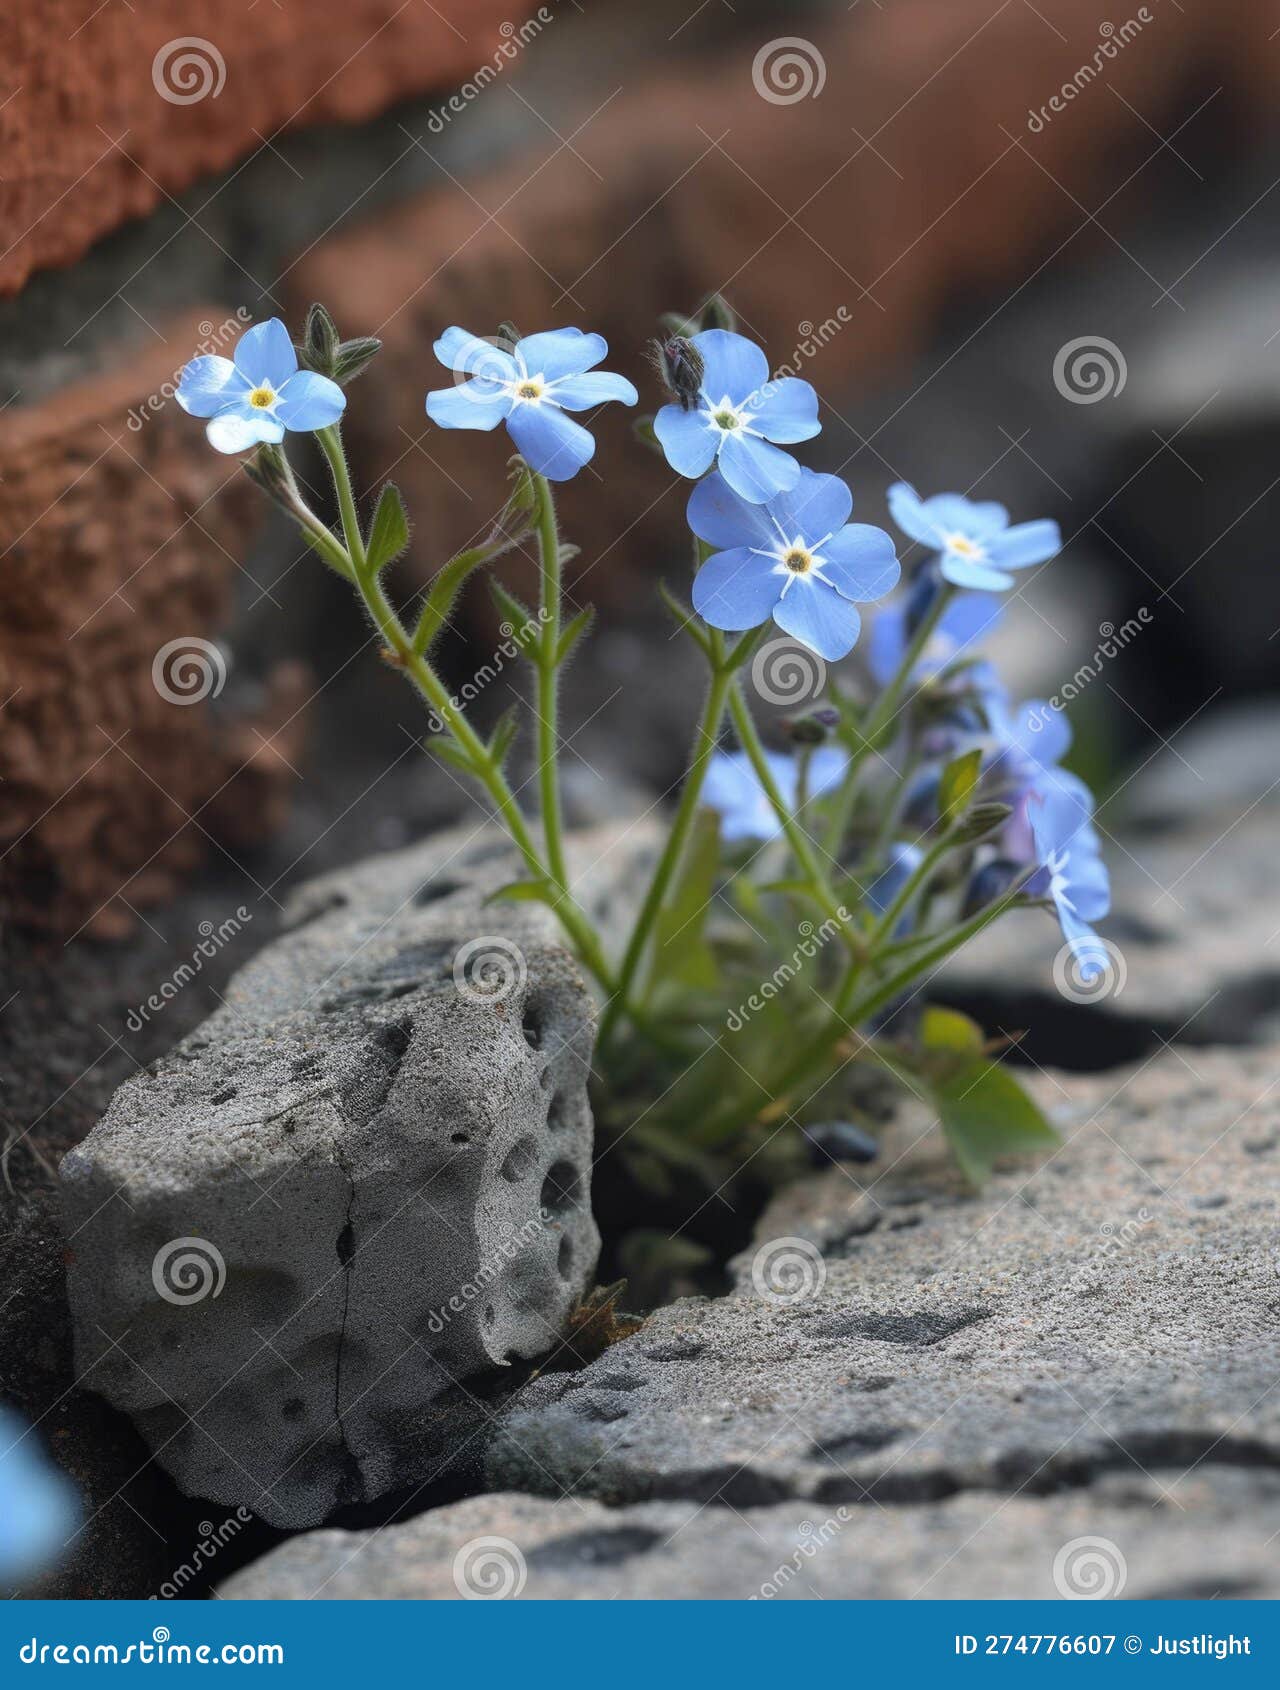 wild forgetmenots have taken root amidst the shattered bricks and broken rifles a reminder of our peace. abandoned